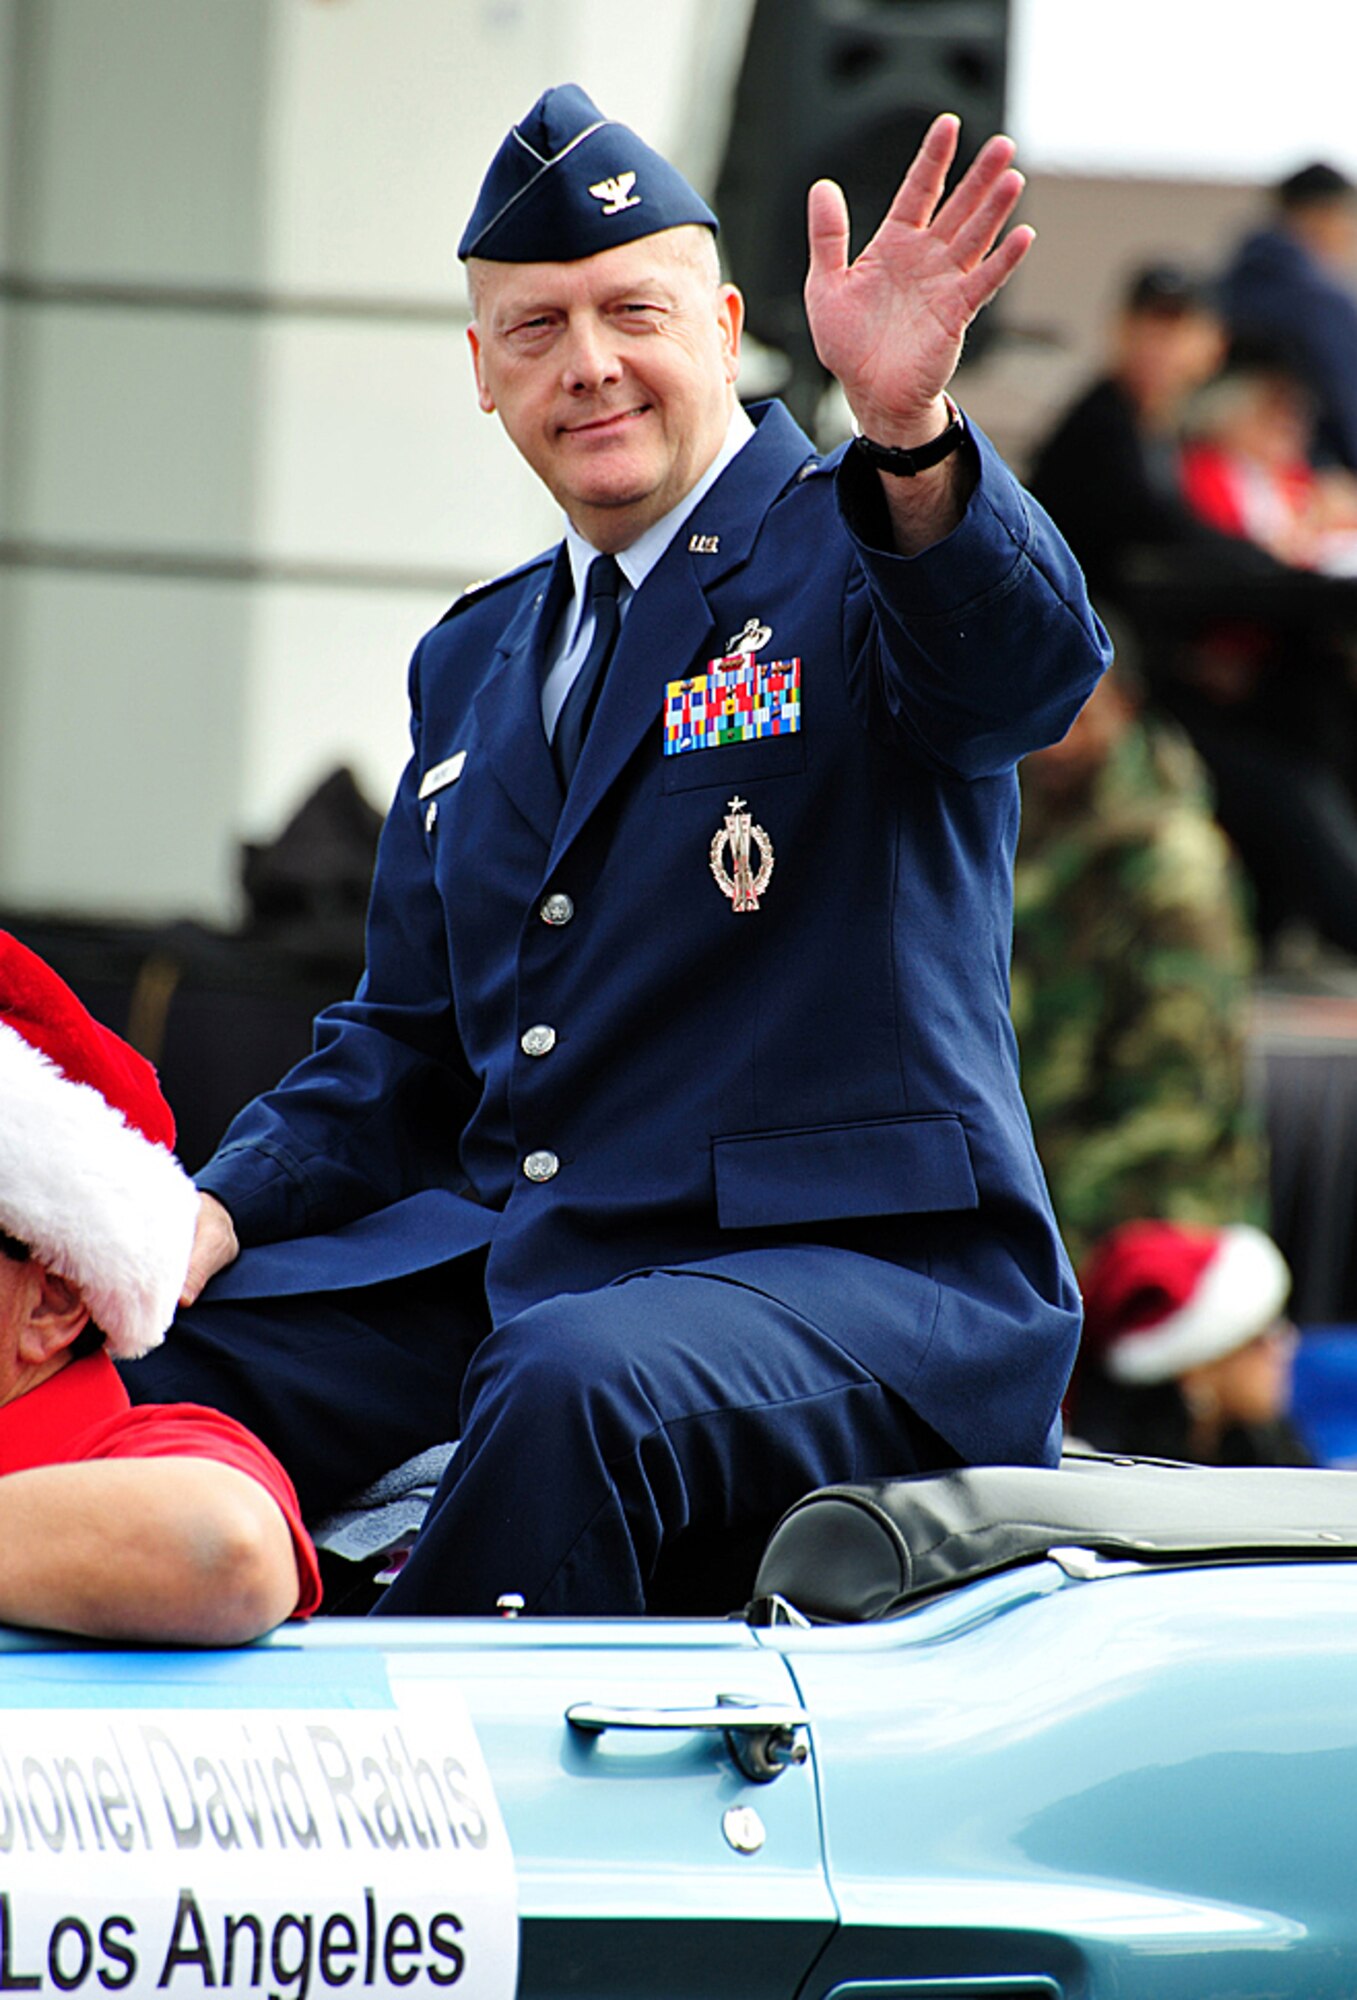 Col. David Raths, 61st Air Base Wing vice commander, represents Los Angeles Air Force Base during the 29th Annual Holiday Spirit of San Pedro Parade, Dec. 6. Also participating from the base are the Los Angeles AFB Honor Guard and Fort MacArthur cheerleading squad.  (Photo by Emilio Sanchez)